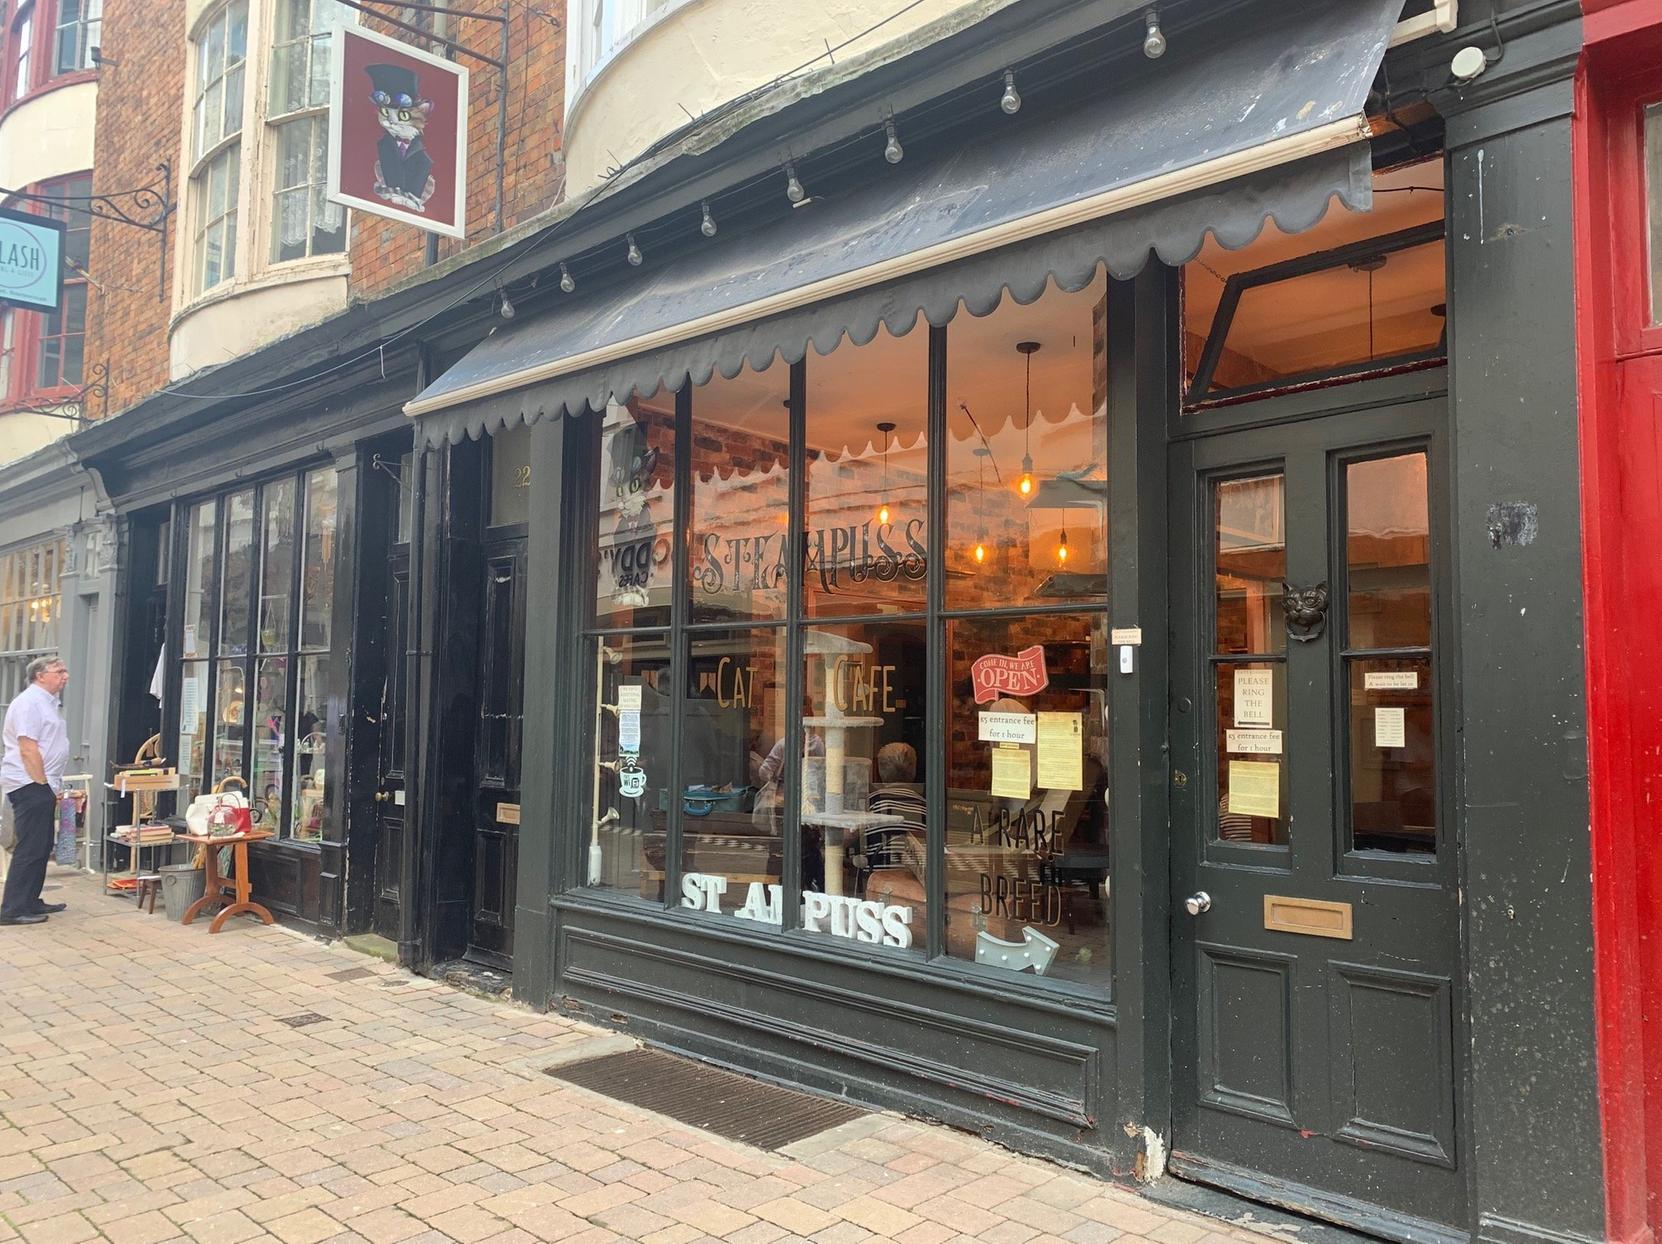 A reviewer said: My wife and I stumbled upon this delightful cafe when walking through Scarborough. We hadn't booked but were made thoroughly welcome. Coffee, tea and food were lovely.